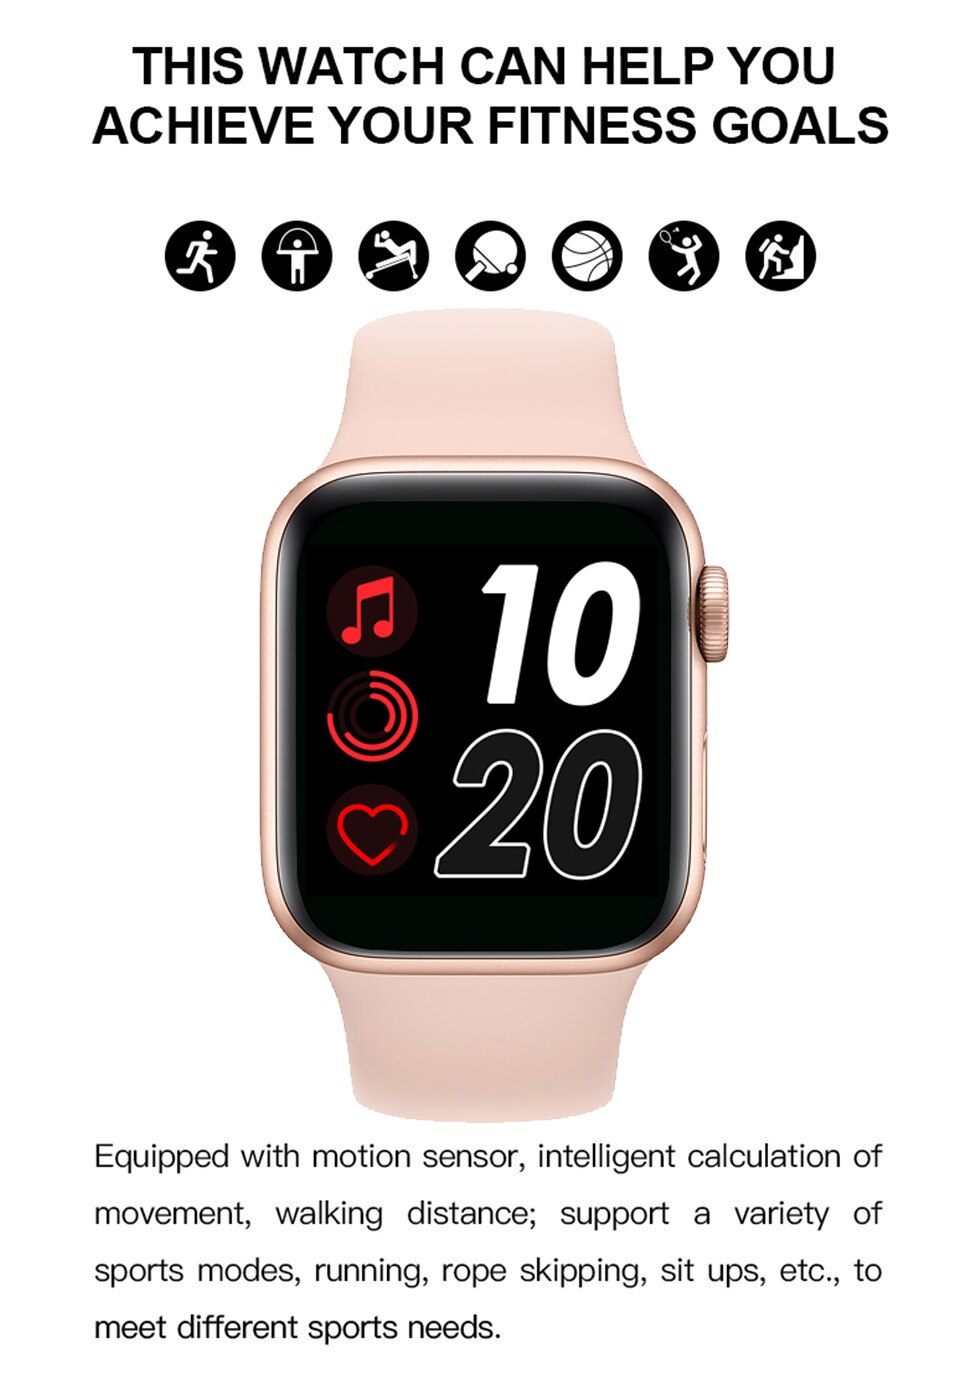 T500 Smartwatch IWO13 Series 5 Bluetooth Call 44mm Smart Watch Heart Rate Monitor Blood Pressure for IOS Android PK IWO 12 IWO 8